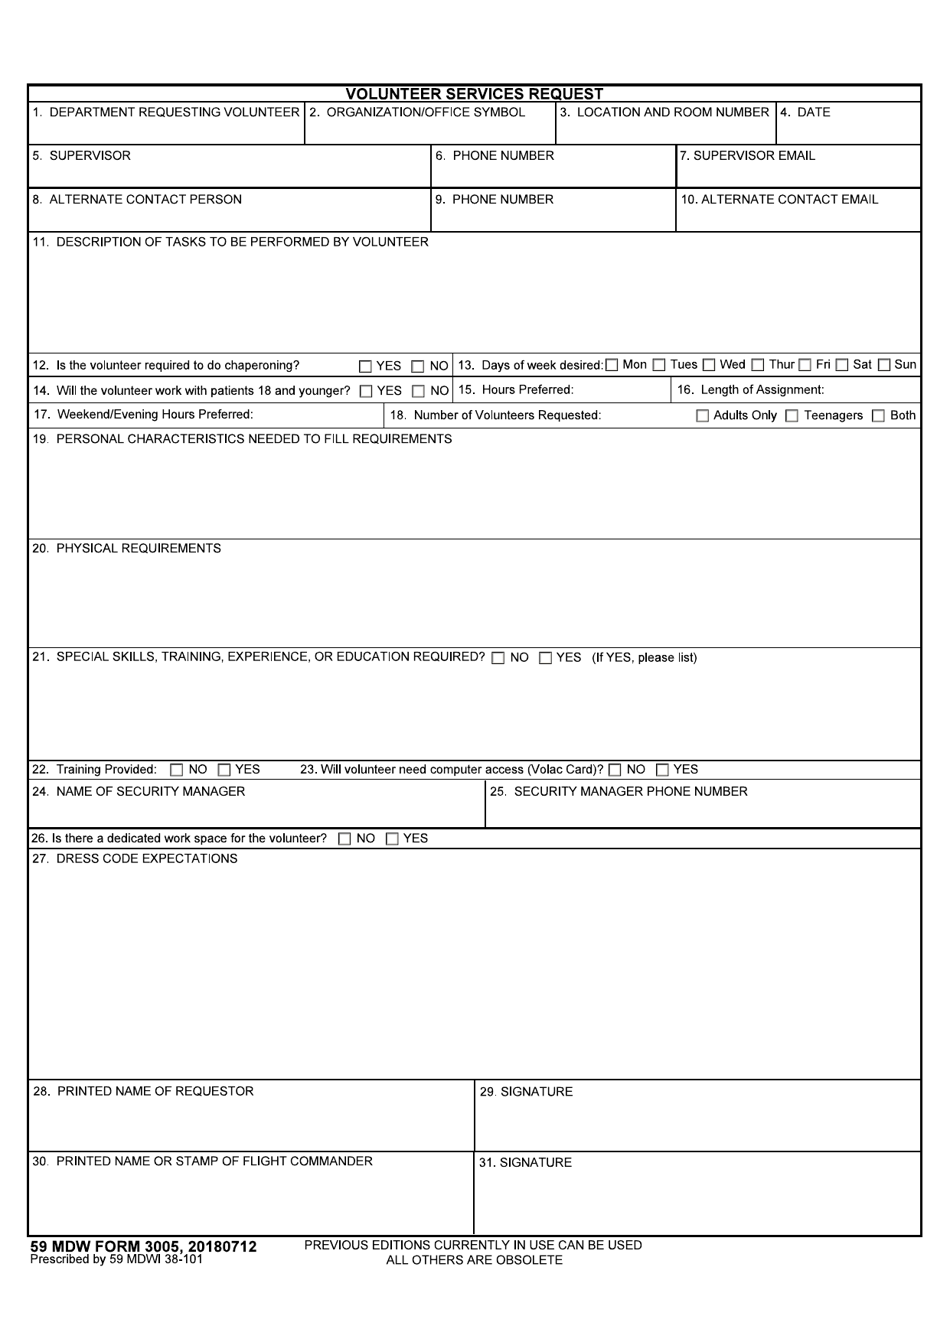 59 MDW Form 3005 Volunteer Services Request, Page 1